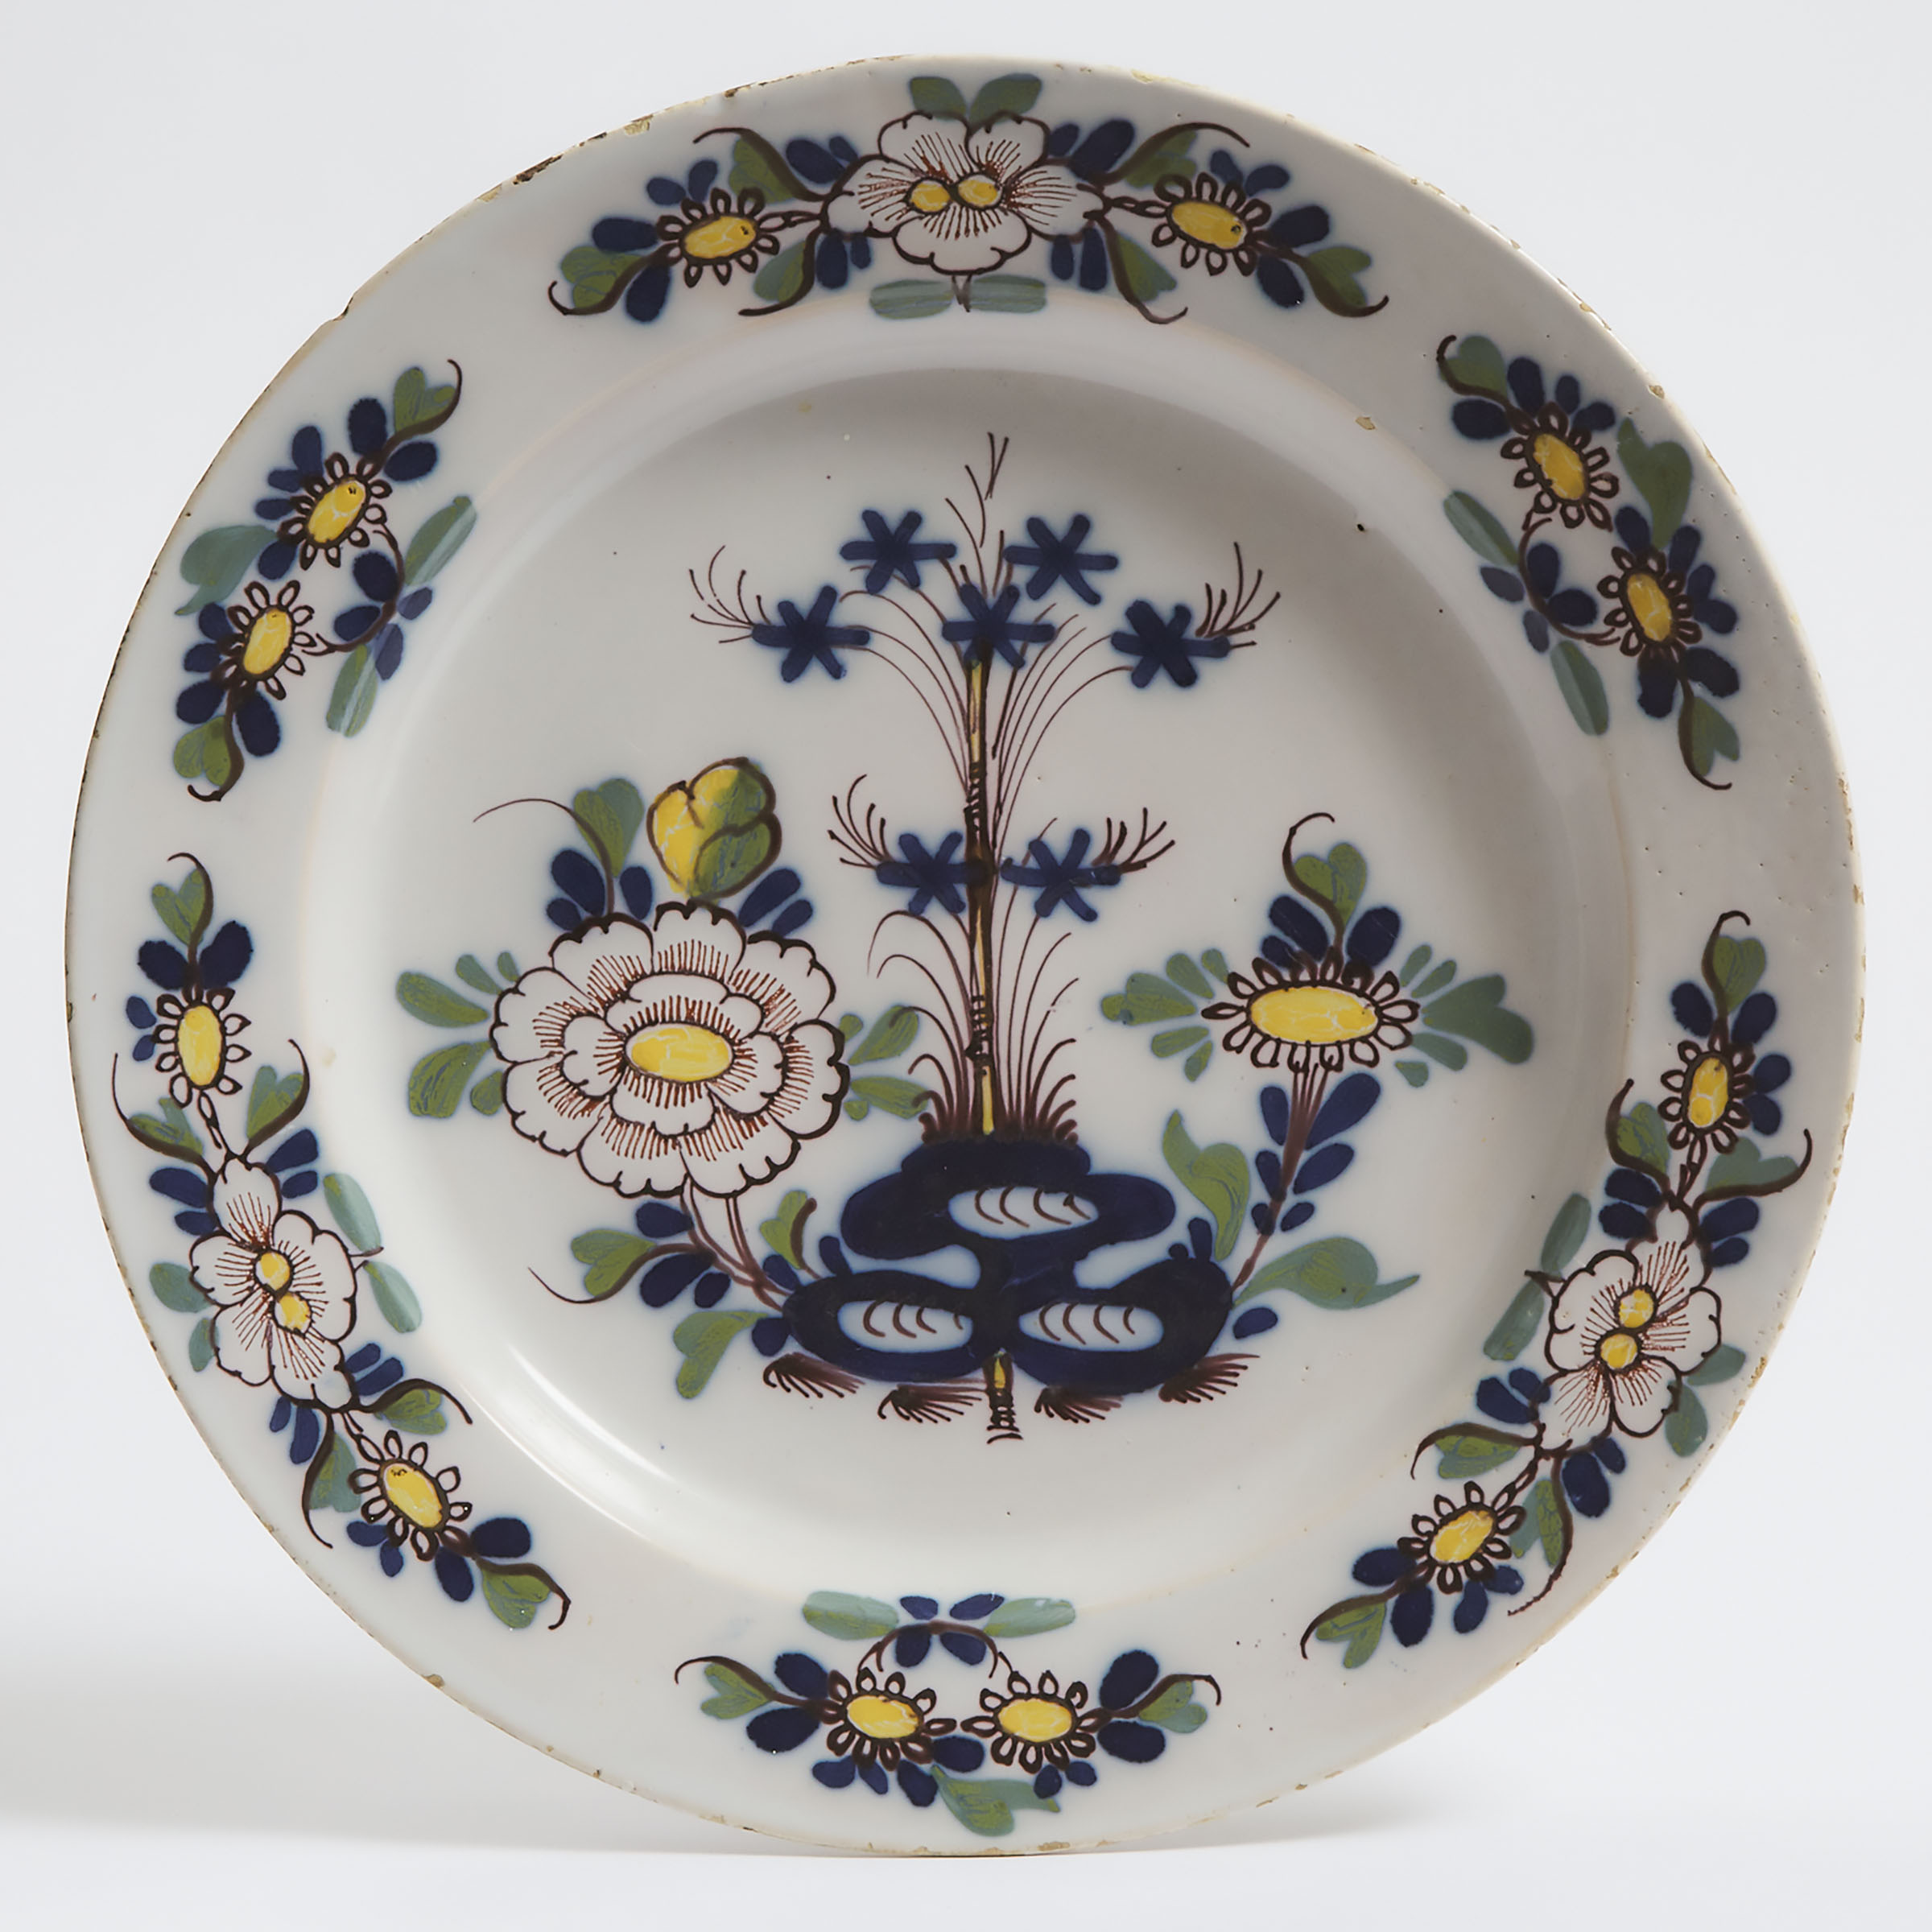 Continental Delft Polychrome Charger, 19th century